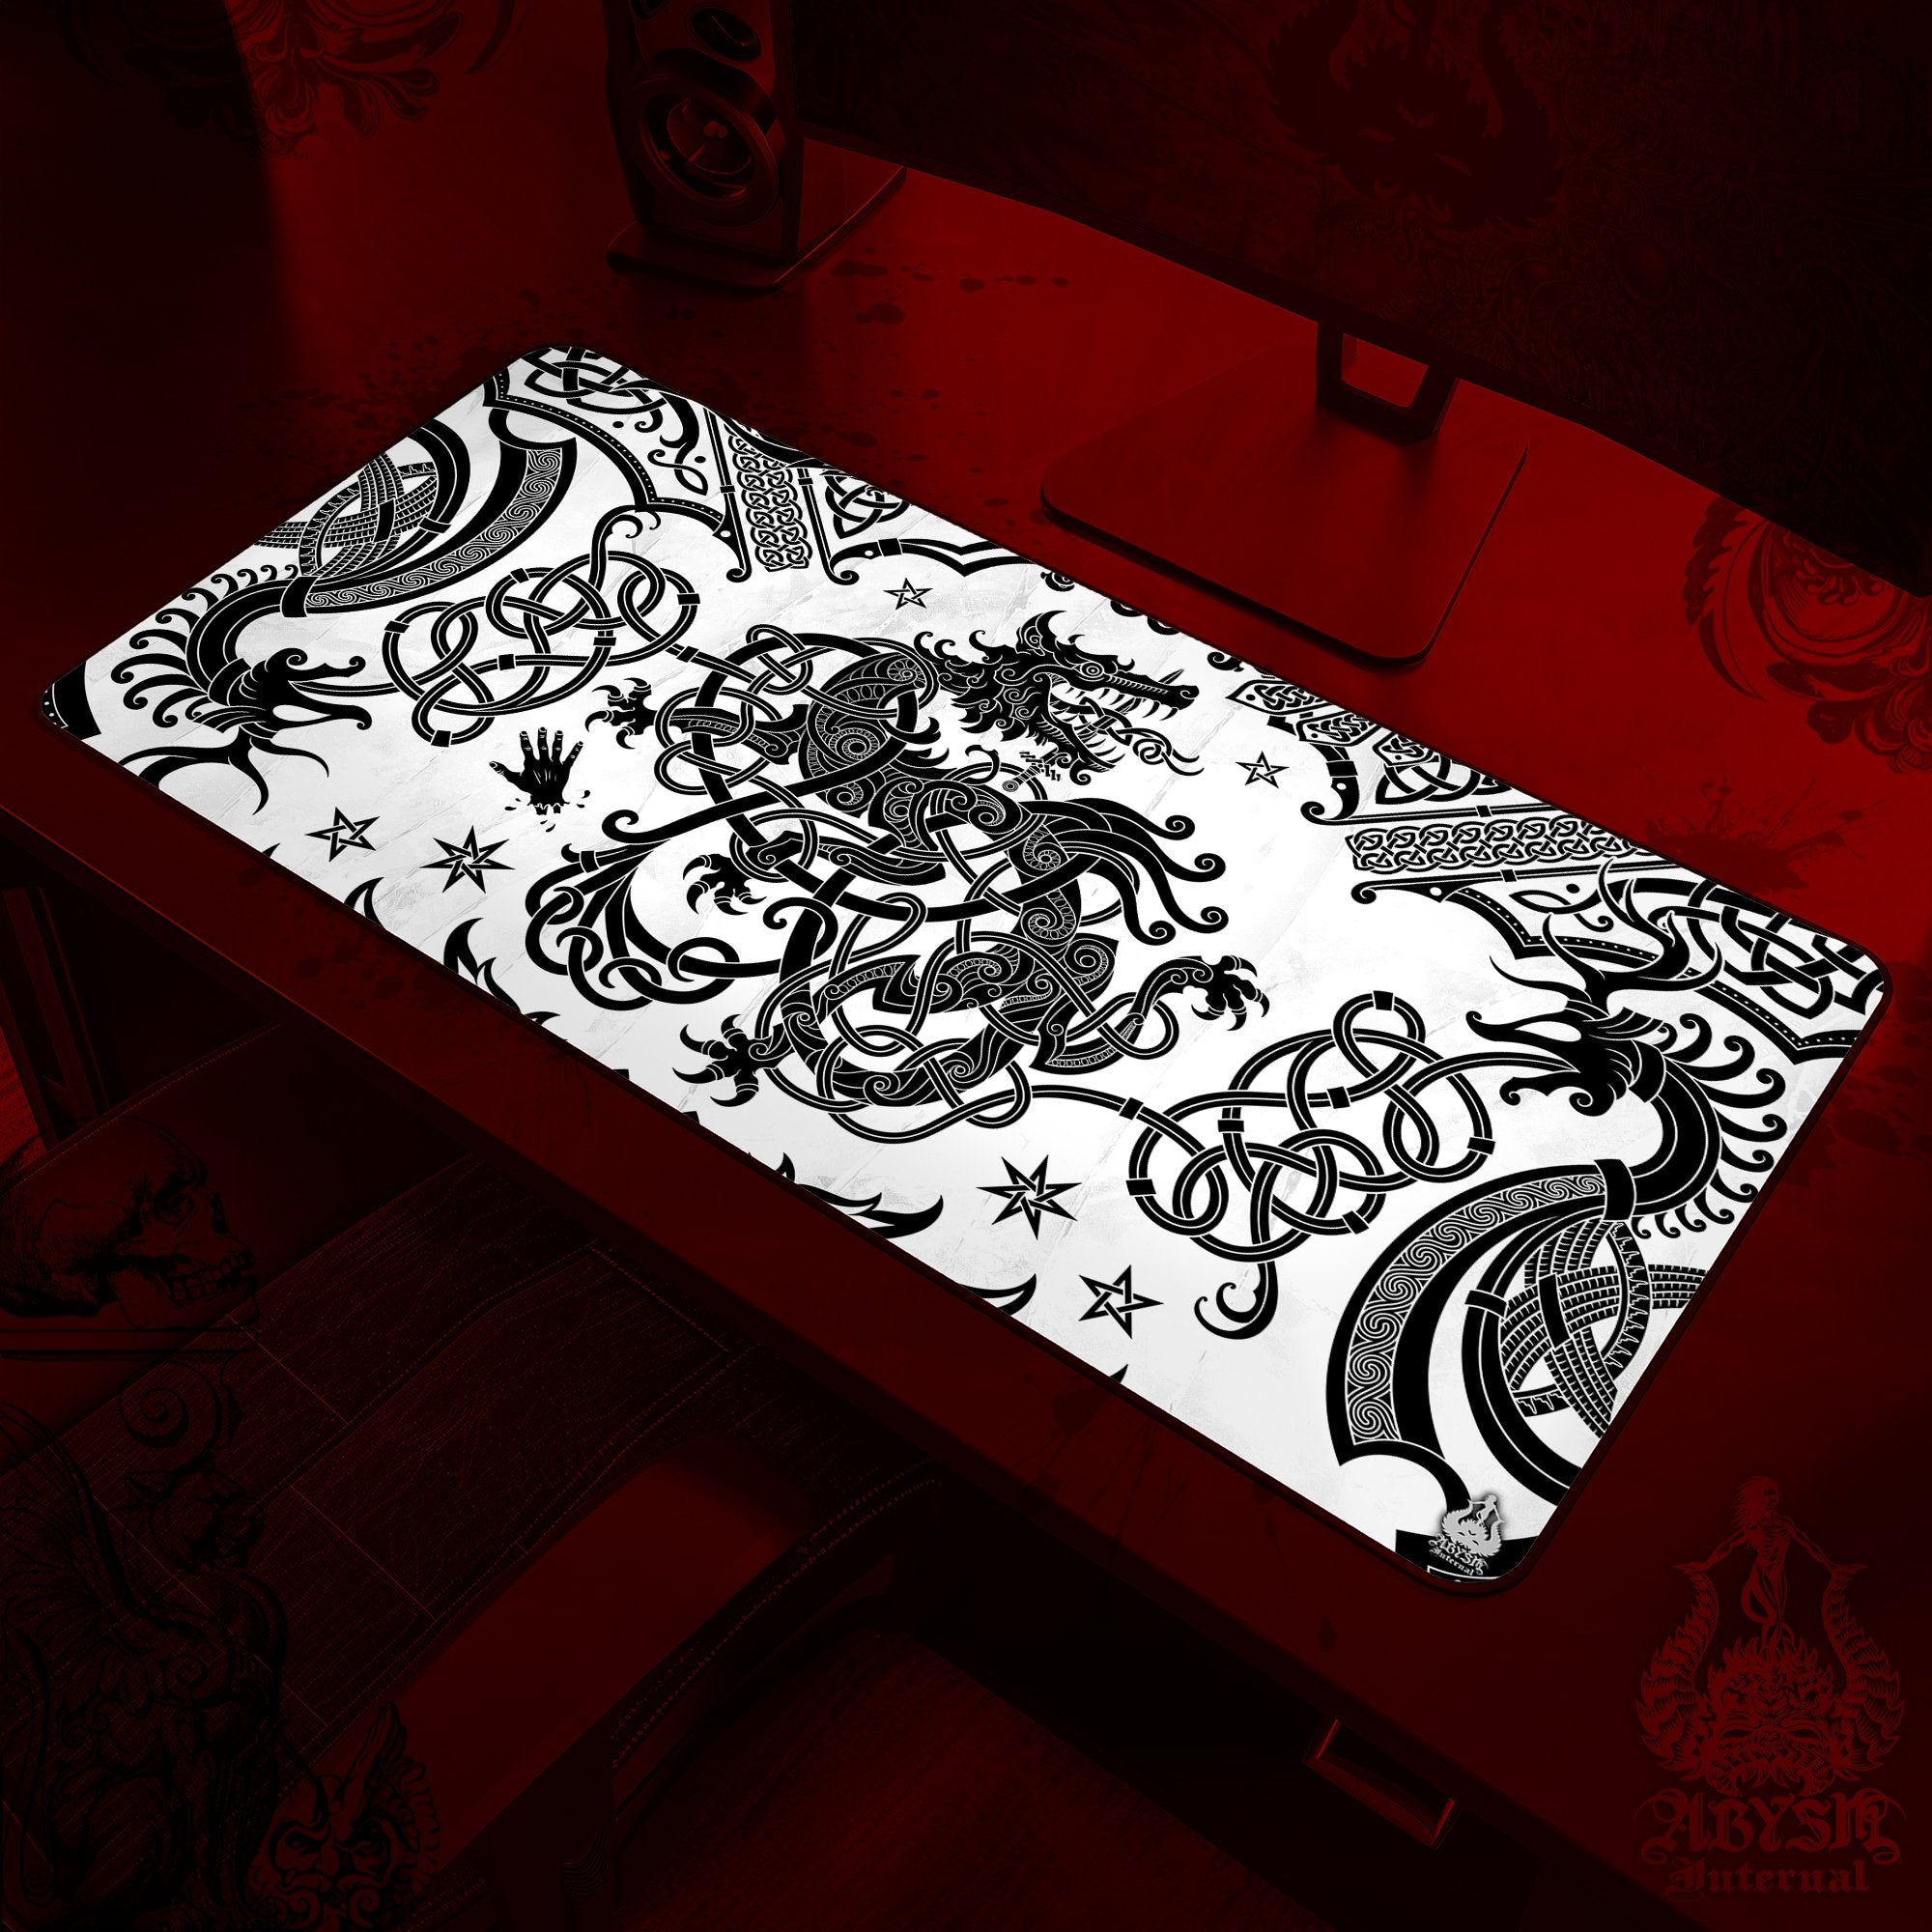 Fenrir Mouse Pad, Norse Wolf Gaming Desk Mat, Viking Workpad, Nordic Knotwork Table Protector Cover, Art Print - Black White - Abysm Internal